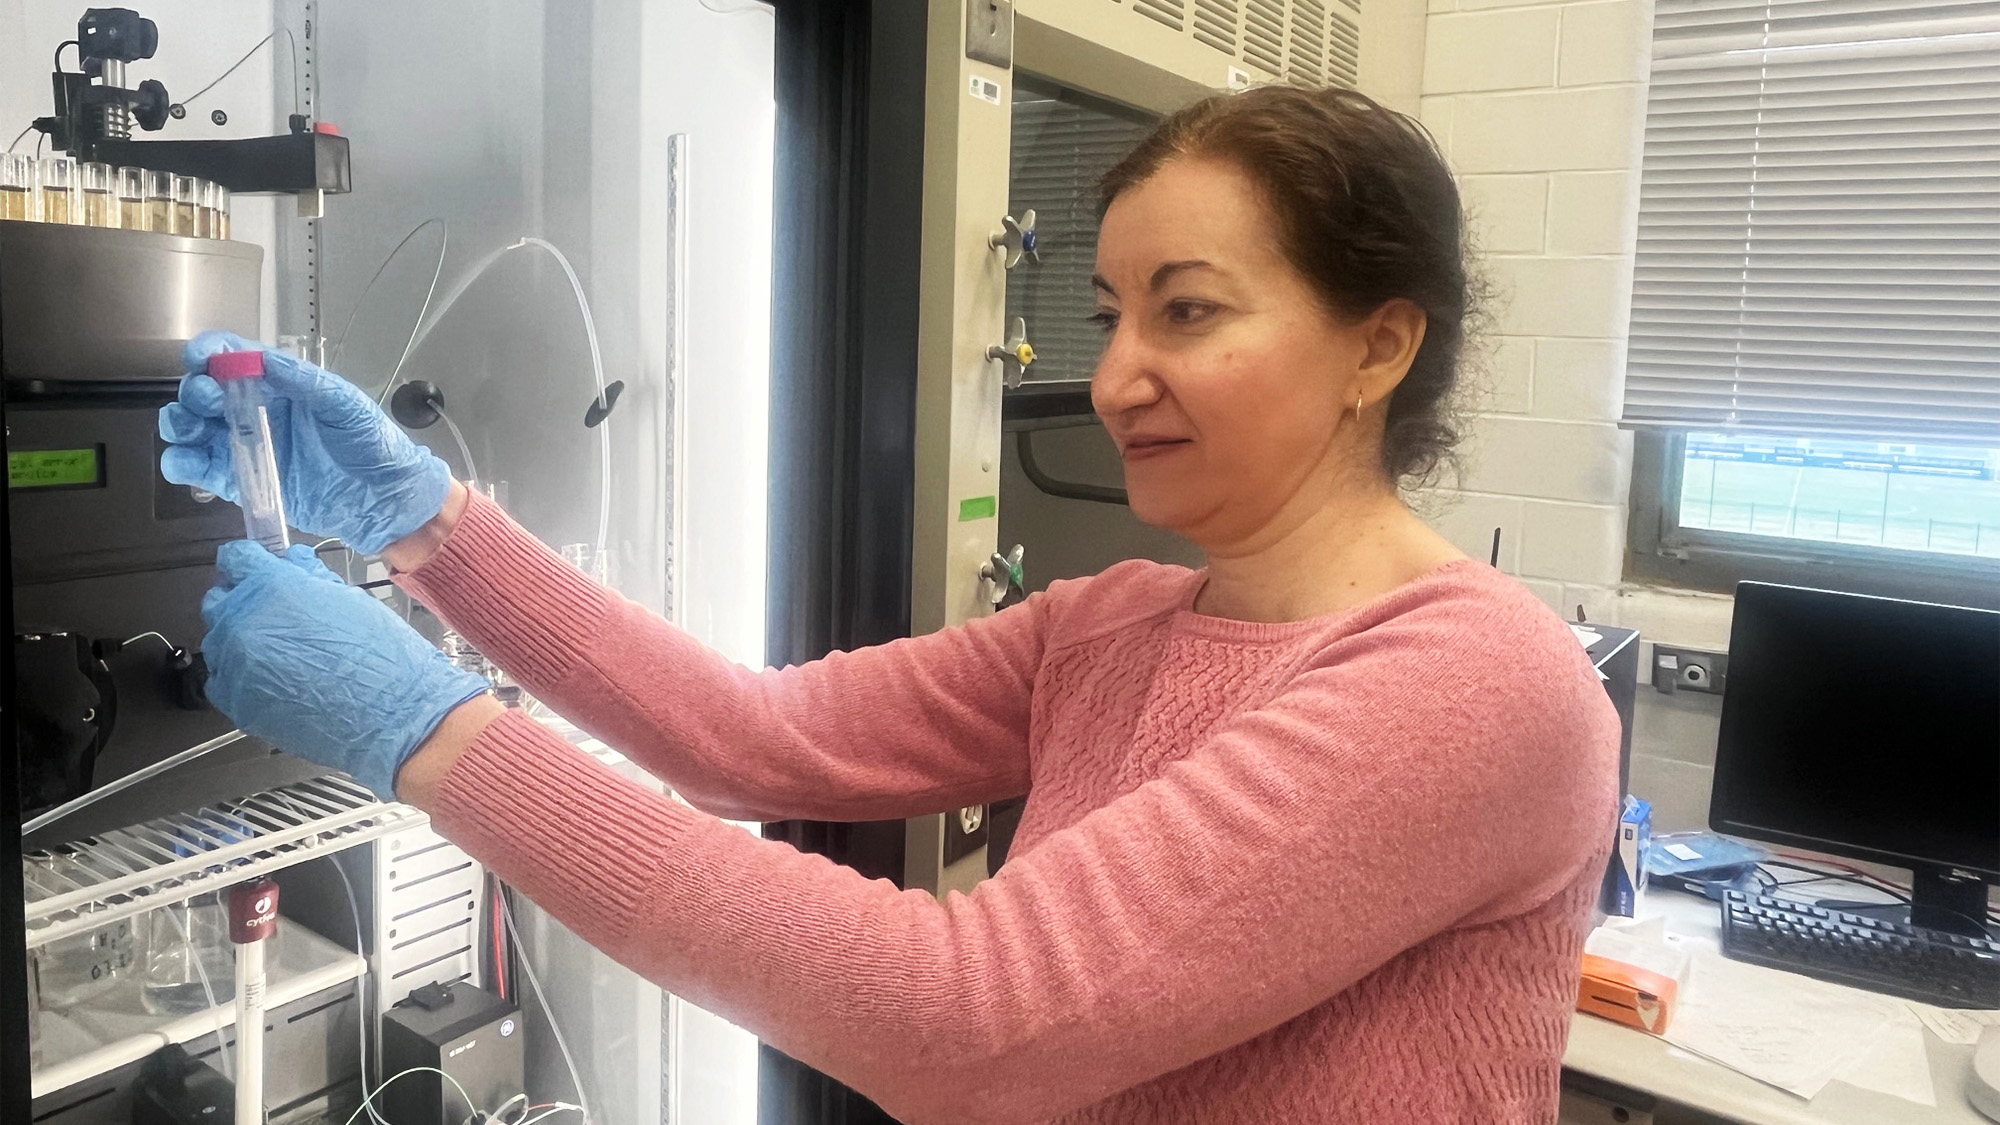 Dr. Brelidze works next to a hood in her lab